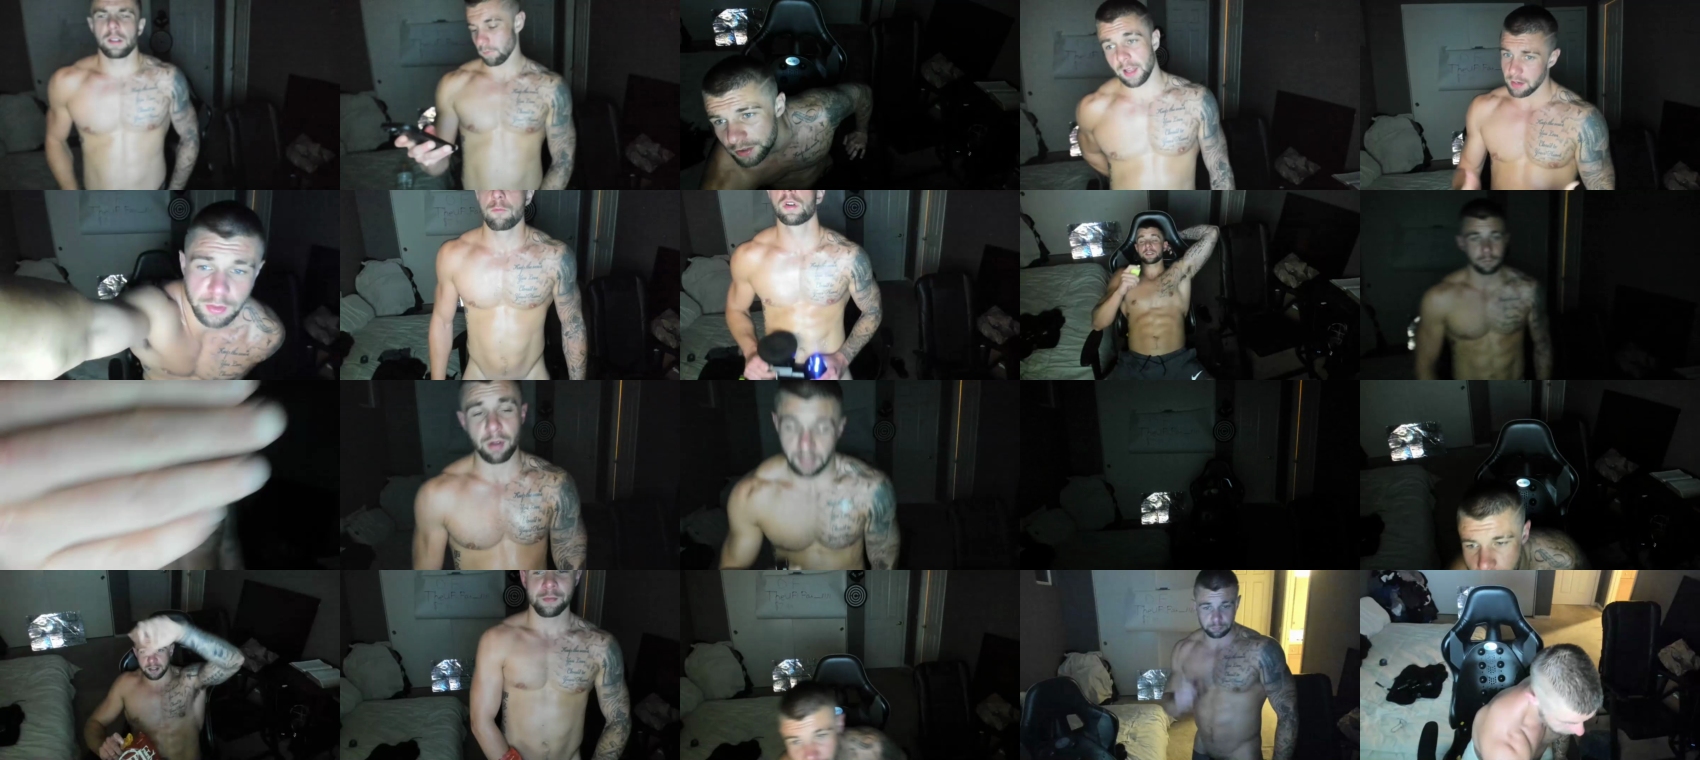 theufcfan_8181 sexybody CAM SHOW @ Chaturbate 04-04-2023